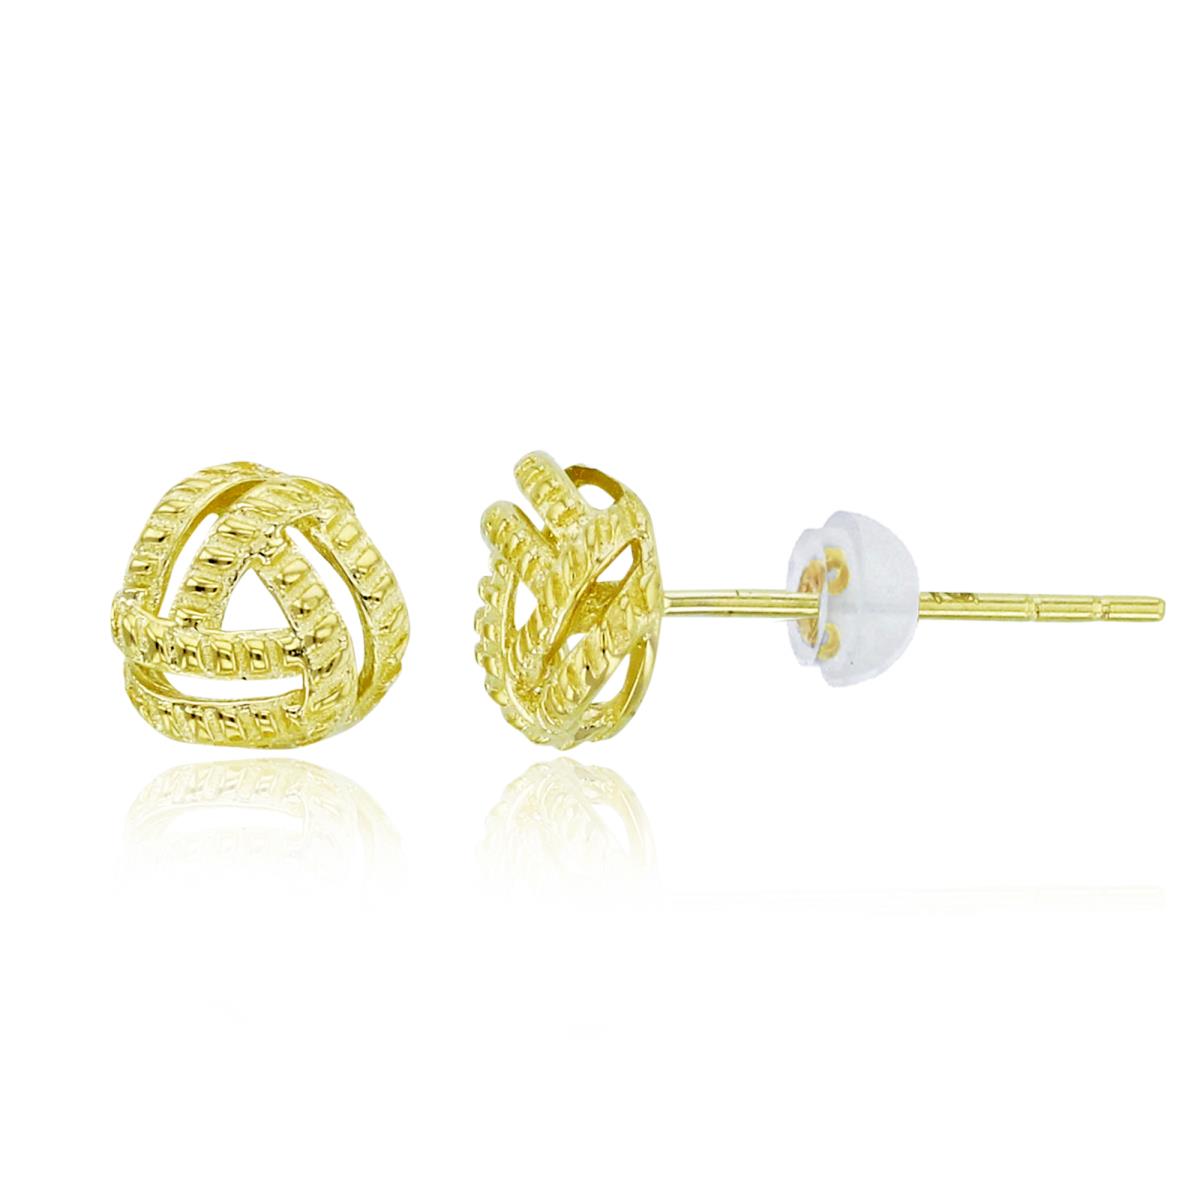 10K Yellow Gold Textured Knot Studs with Silicon Backs